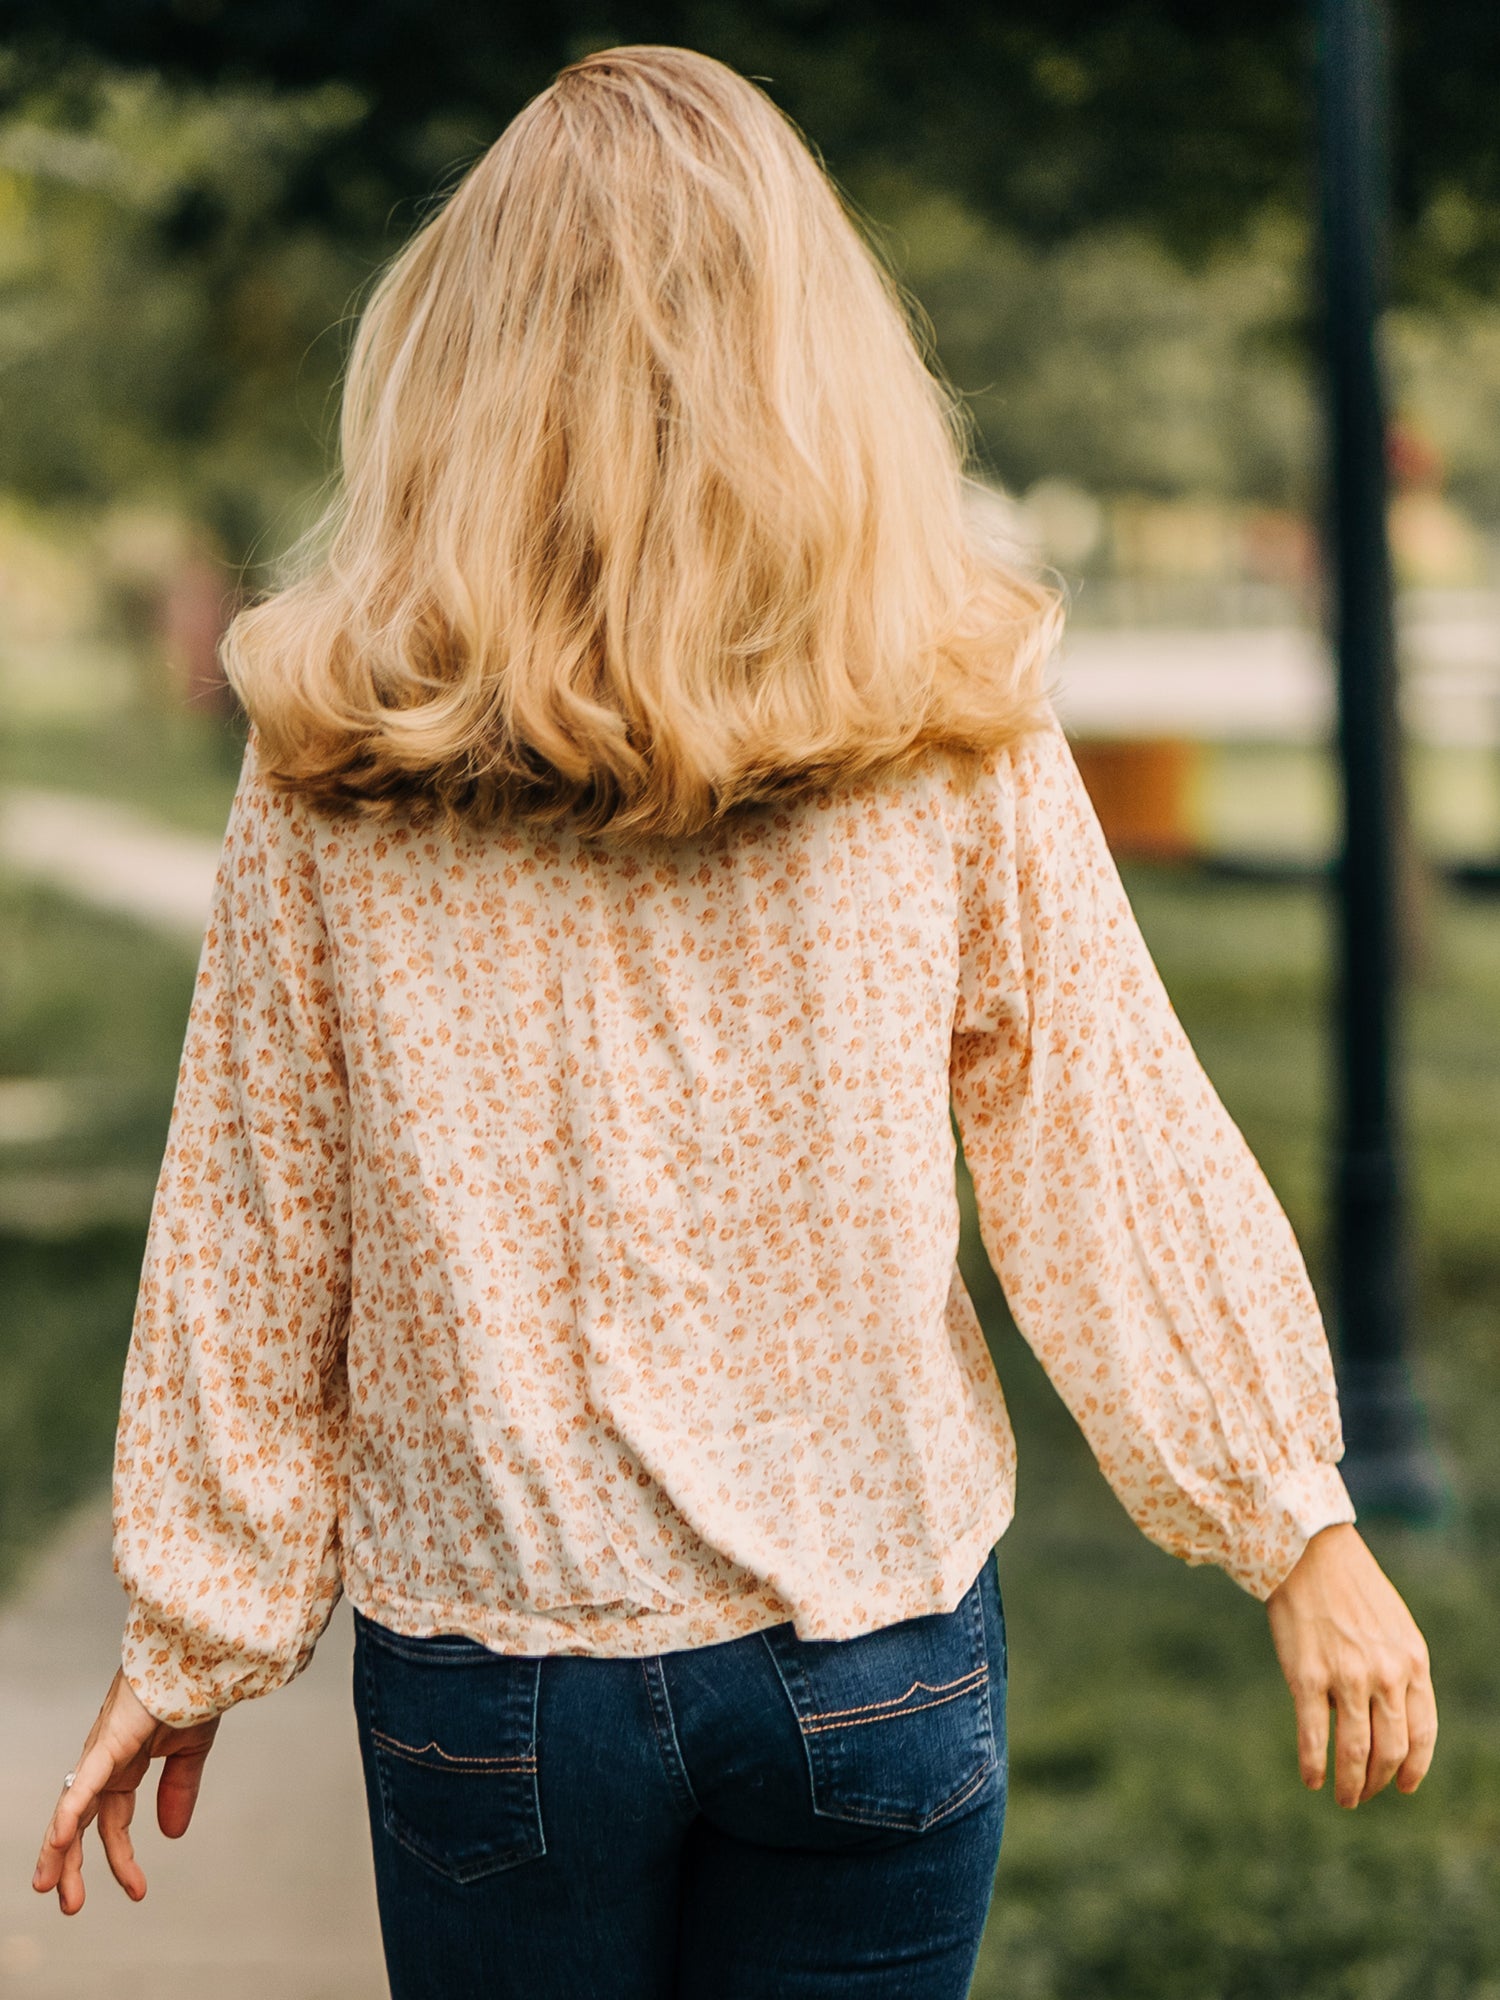 This image of a woman features the product Women's Long Sleeve Blouse - Golden Floral. This billowy long sleeve top has a keyhole neck with a single button. It comes in a pattern of small gold roses on a cream background.